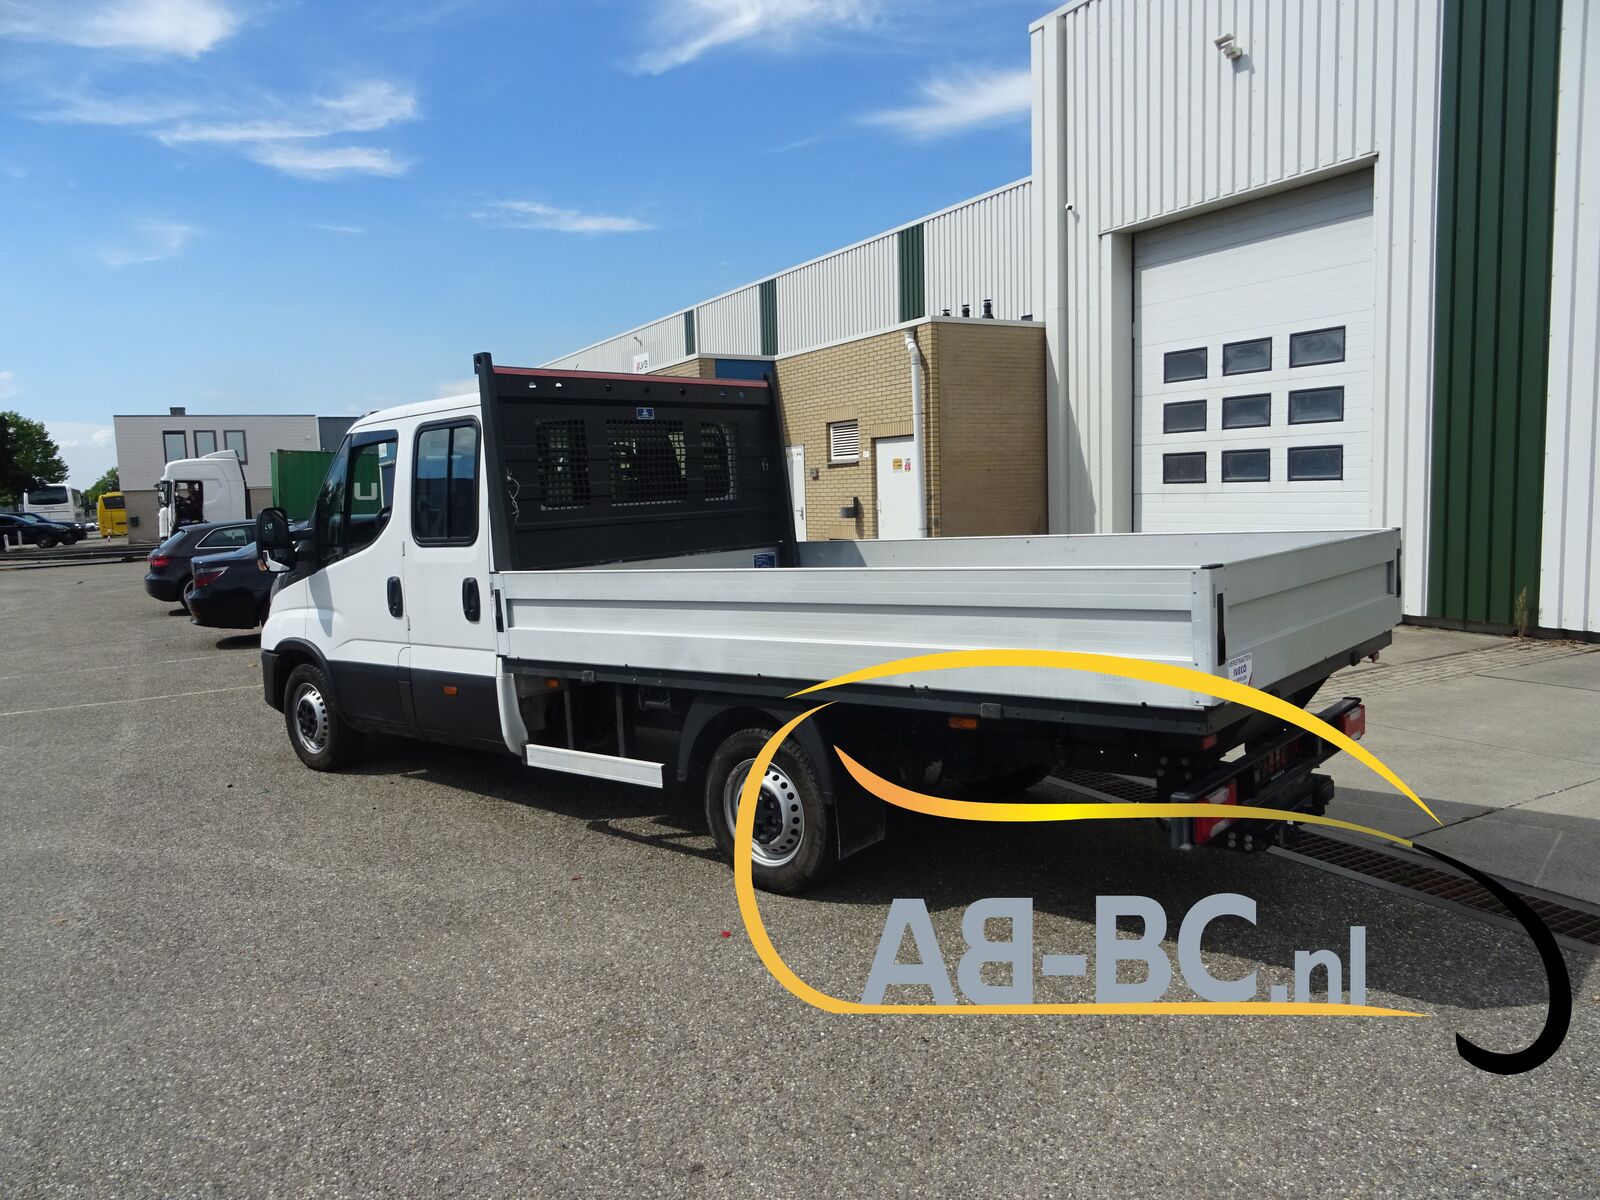 commercial-vehicle-flatbed-truck-3-5t-IVECO-Daily-35s14-DC-openlaadbak---1661344720776443848_orig_758486830356a00e805897064391f8bd--22082415210565311400